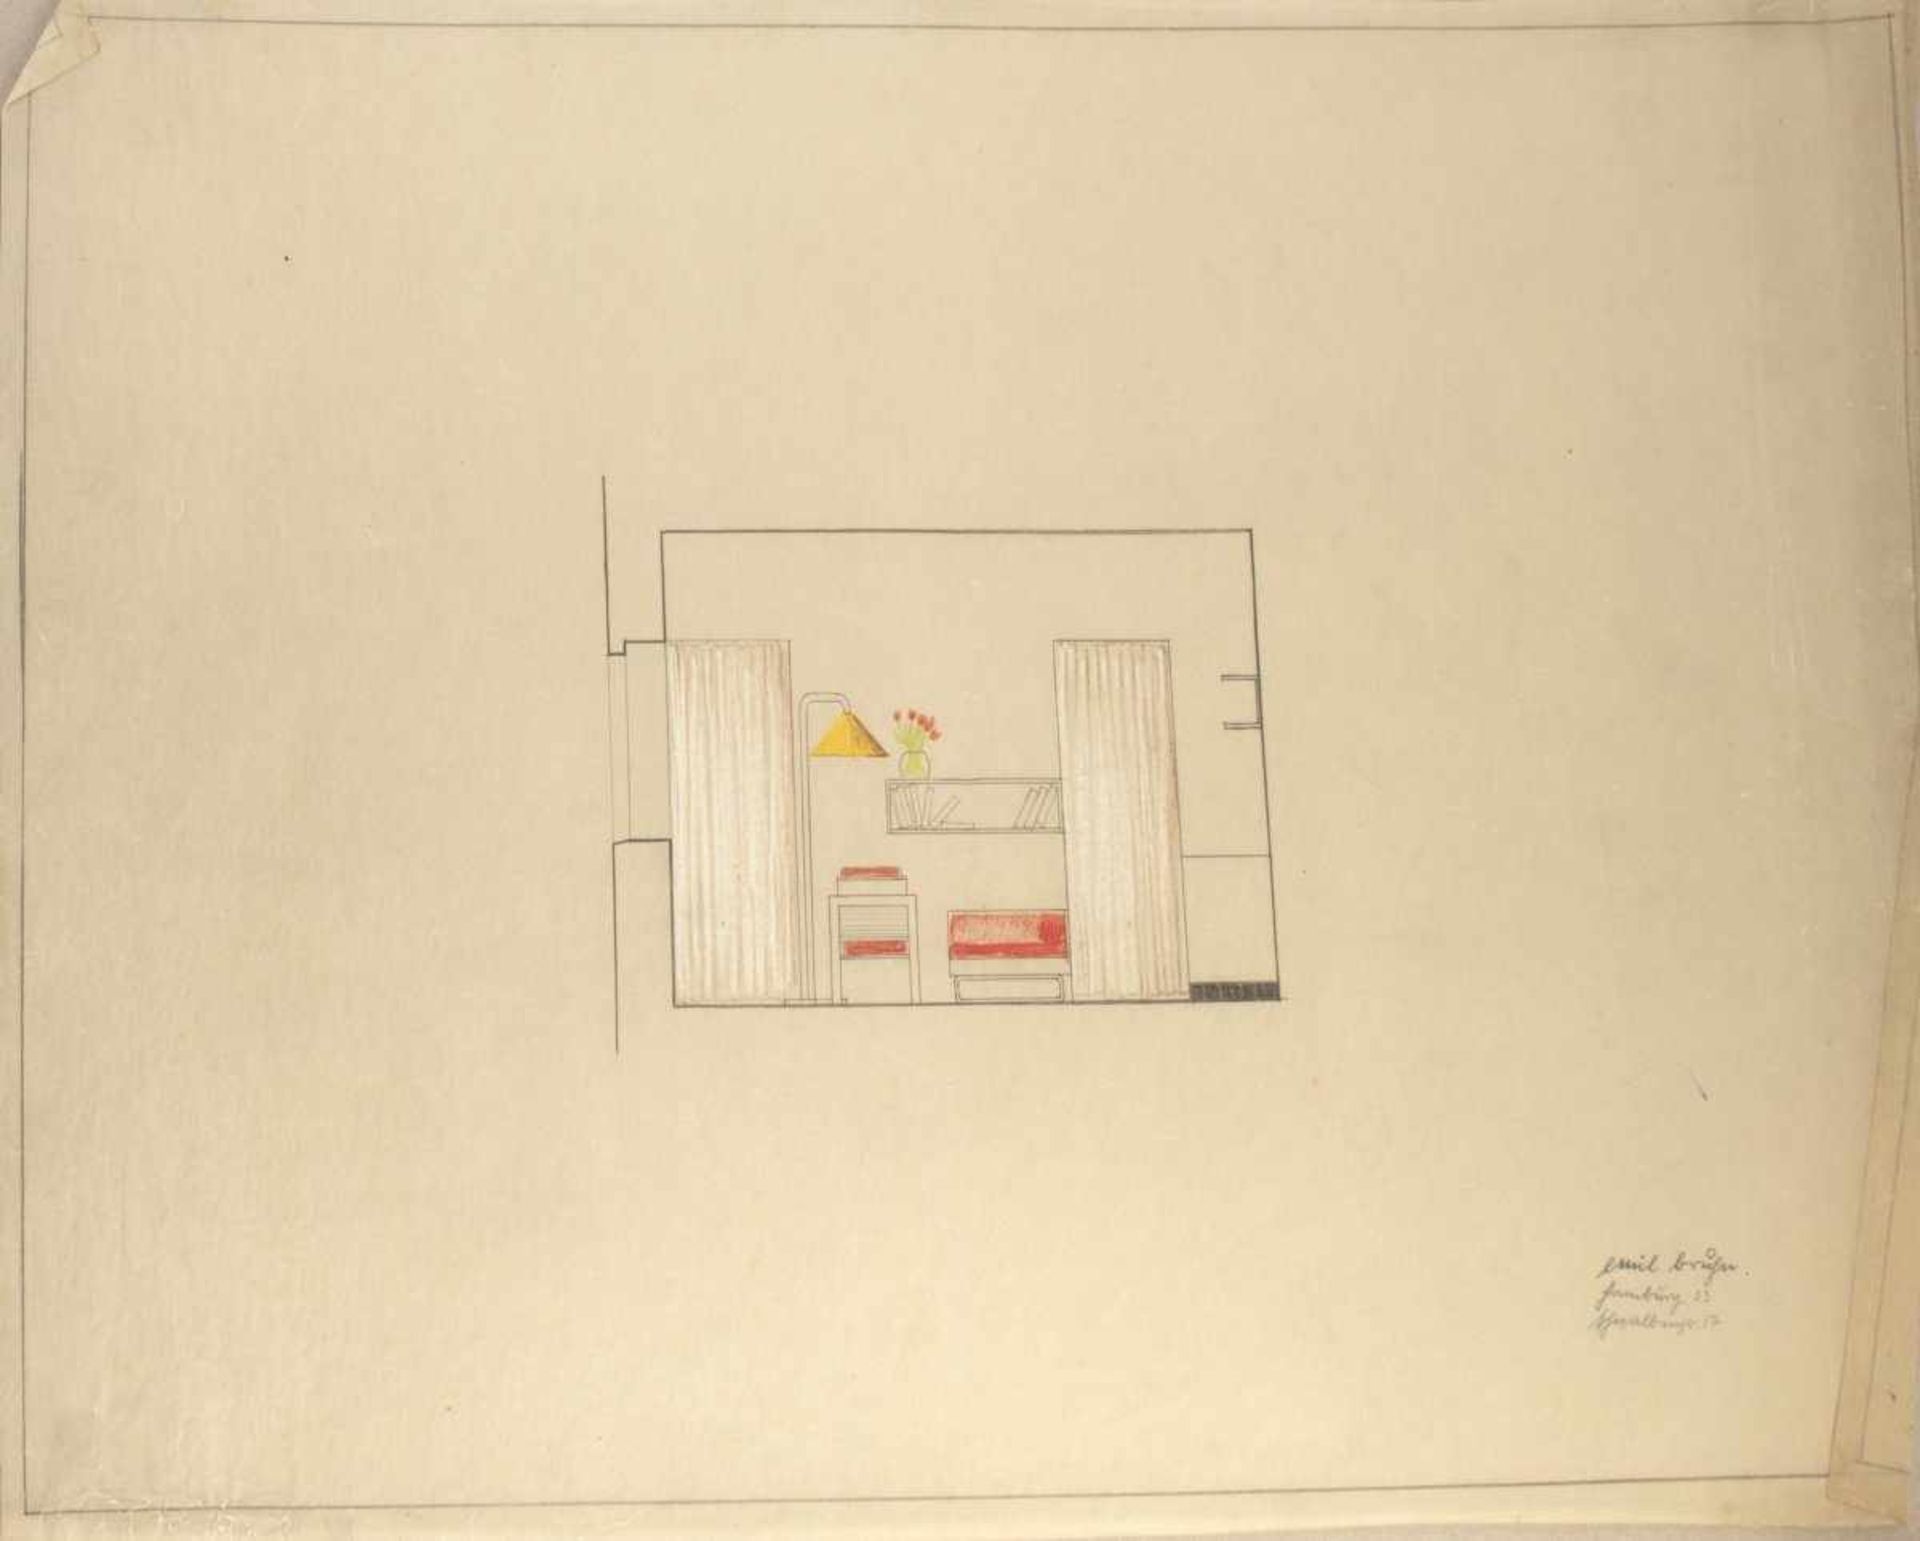 Emil Bruhn, Architectural drawings, c. 1931-33Architectural drawings, c. 1931-3327 drawings in - Bild 13 aus 20